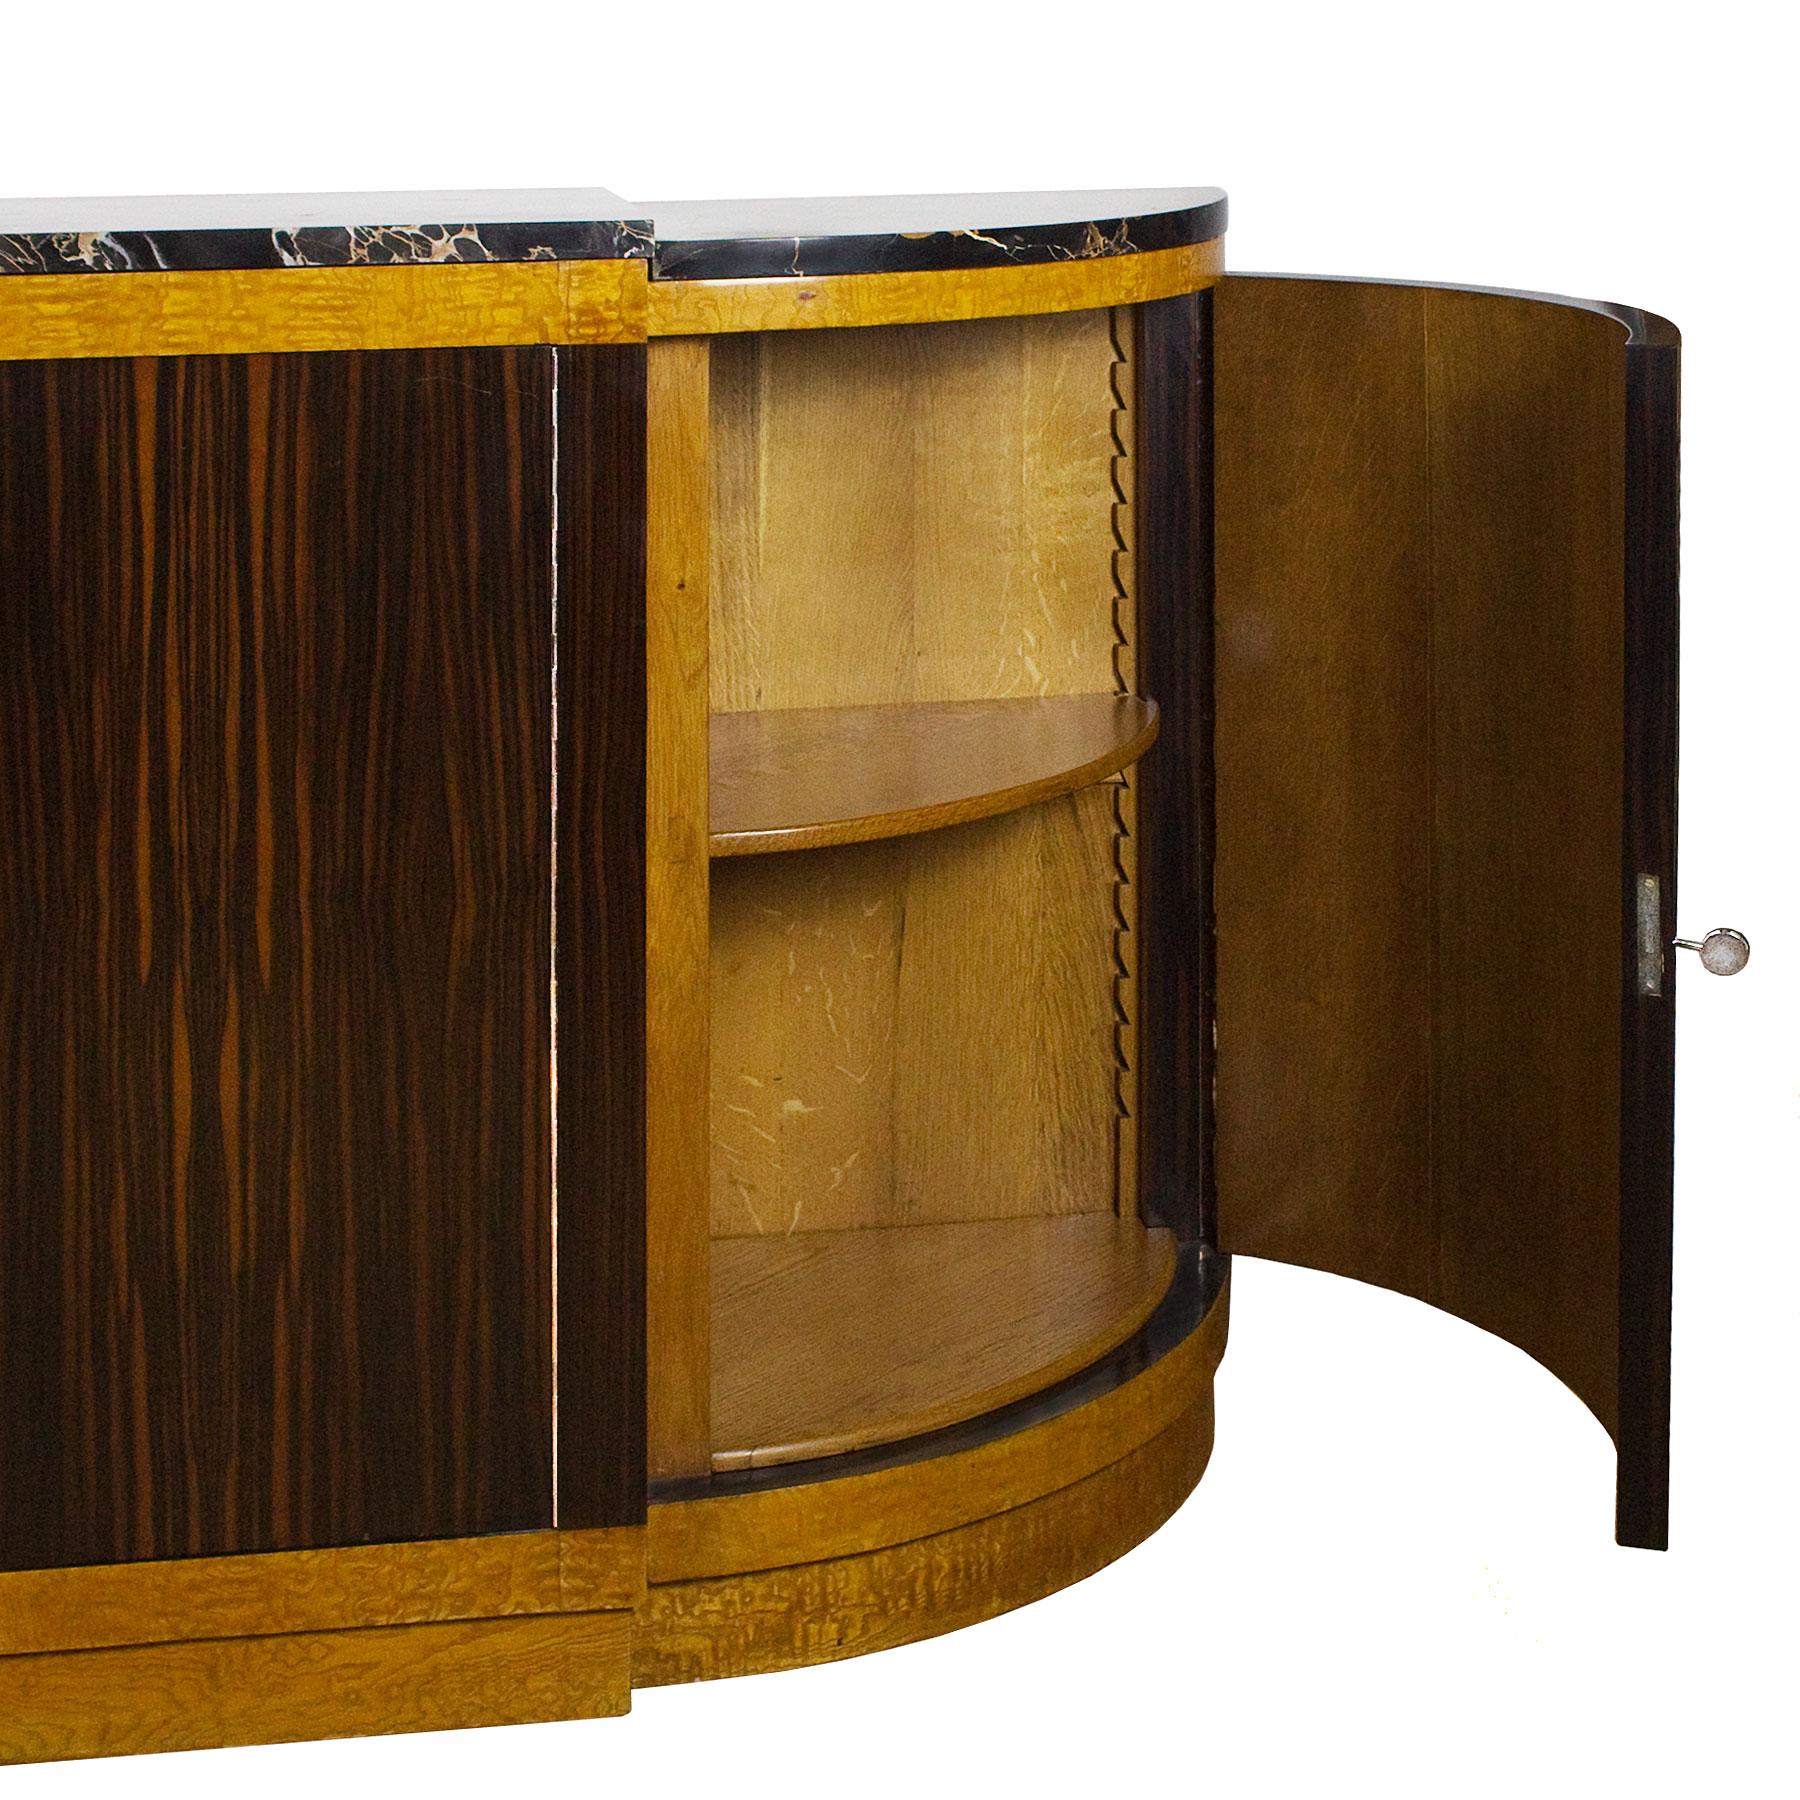 Rounded Art Deco Sideboard by Jean Fauré, Macassar Ebony - France, 1930s For Sale 5